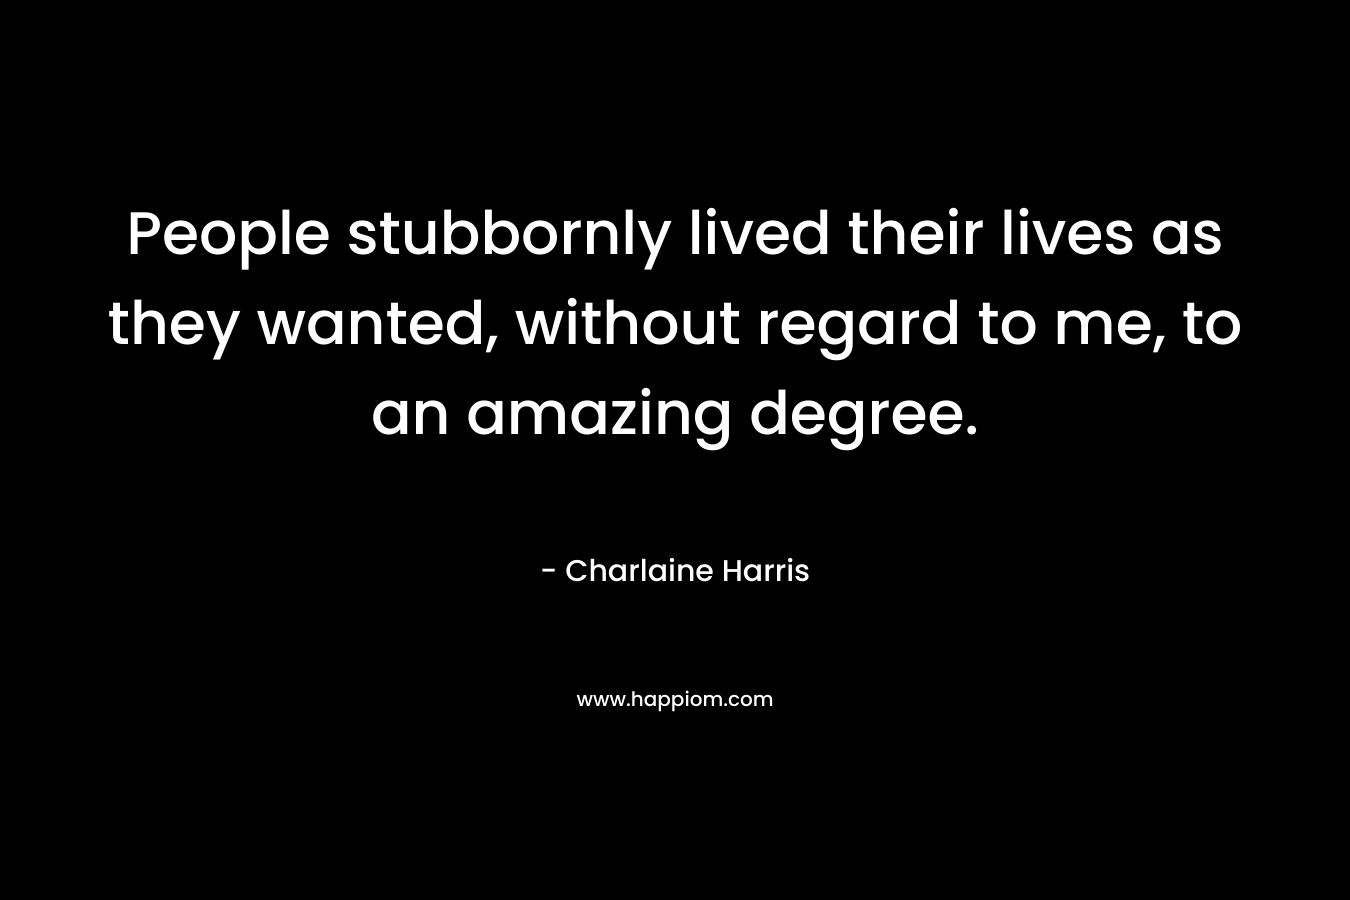 People stubbornly lived their lives as they wanted, without regard to me, to an amazing degree.